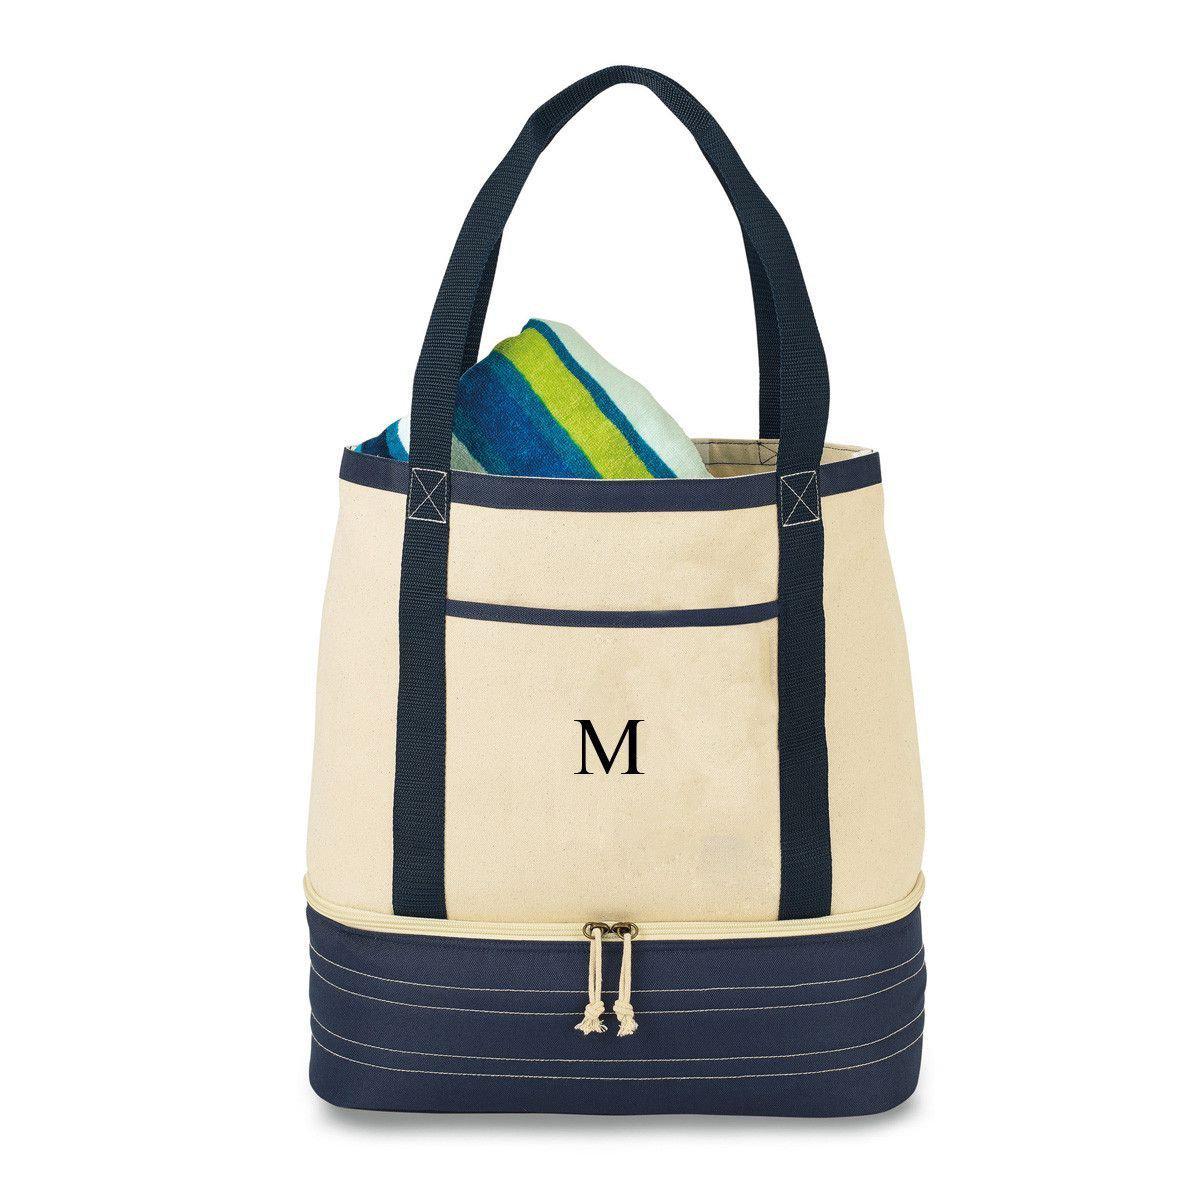 lands end tote bags personalized